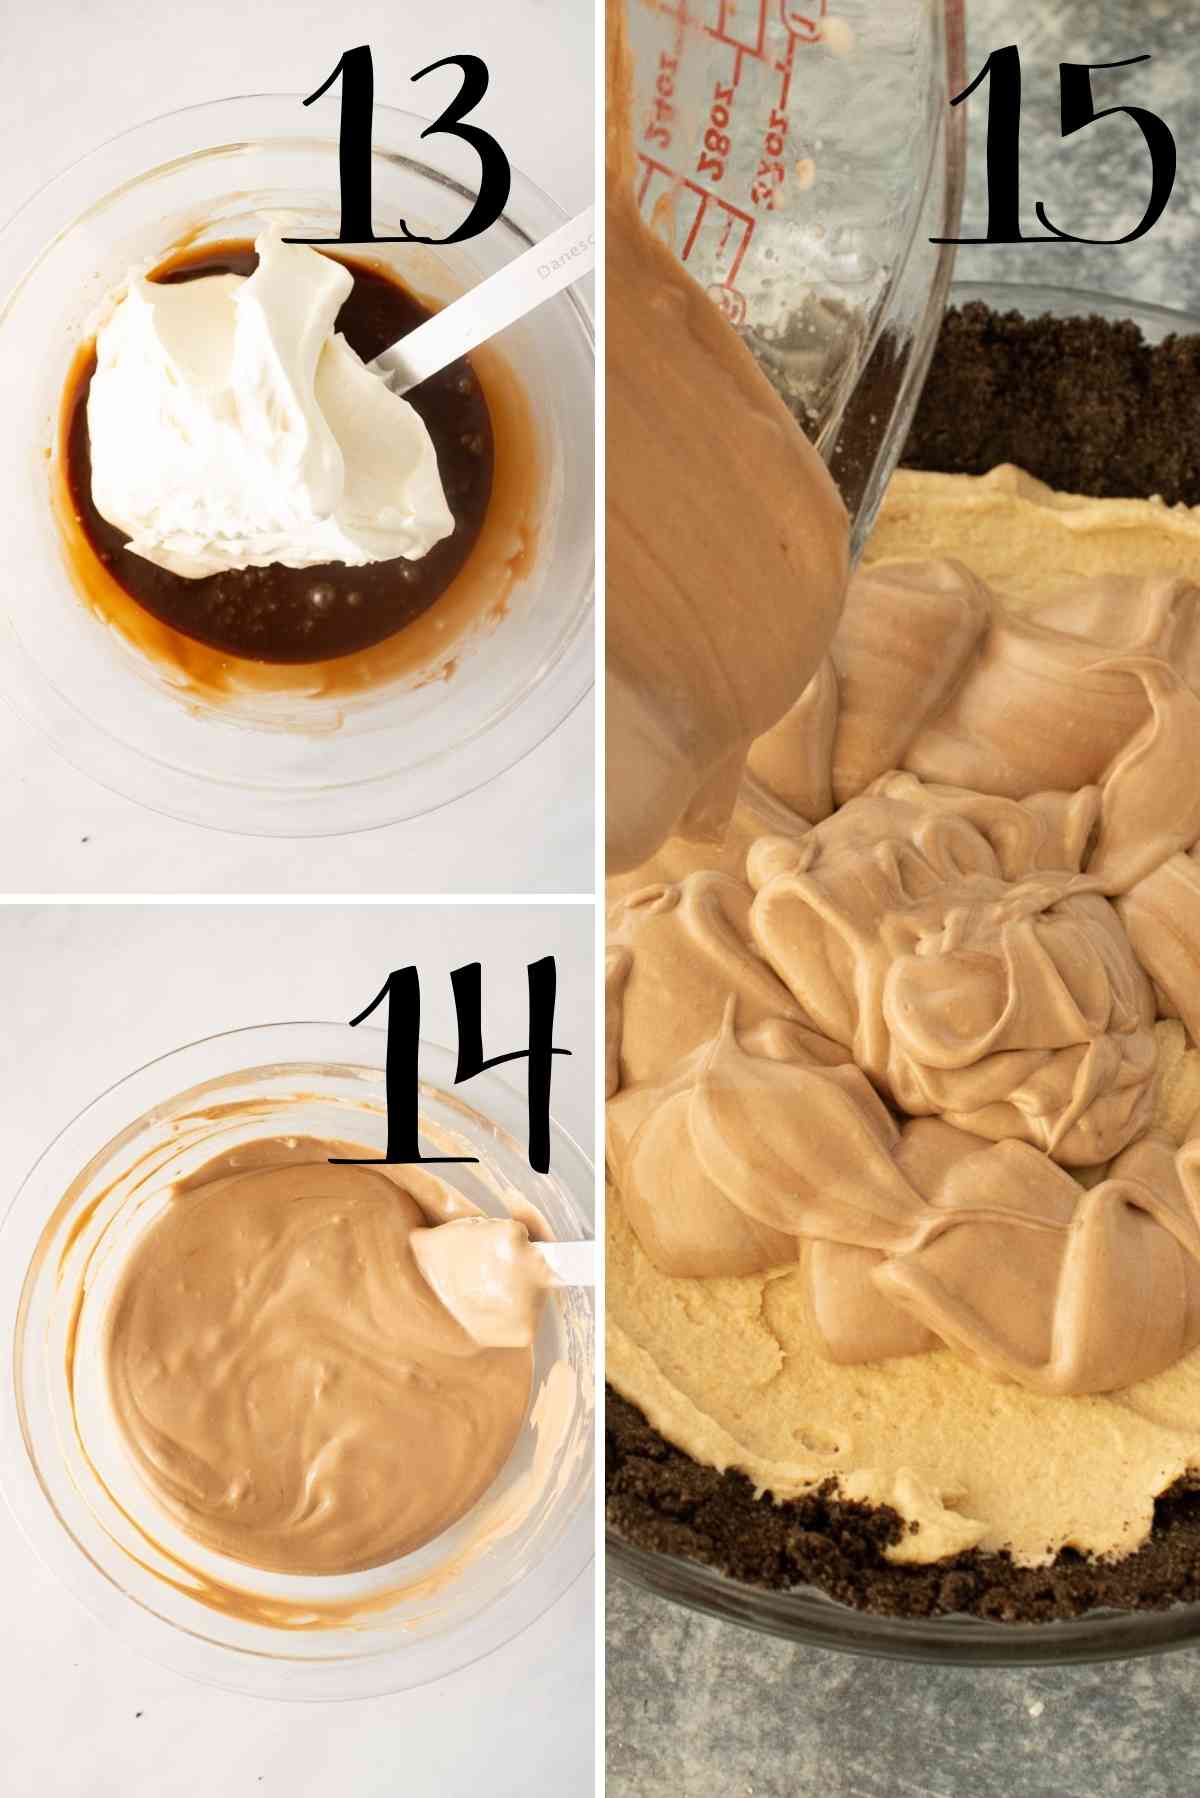 Folding the melted chocolate into whipped cream and spreading over the peanut butter filling.